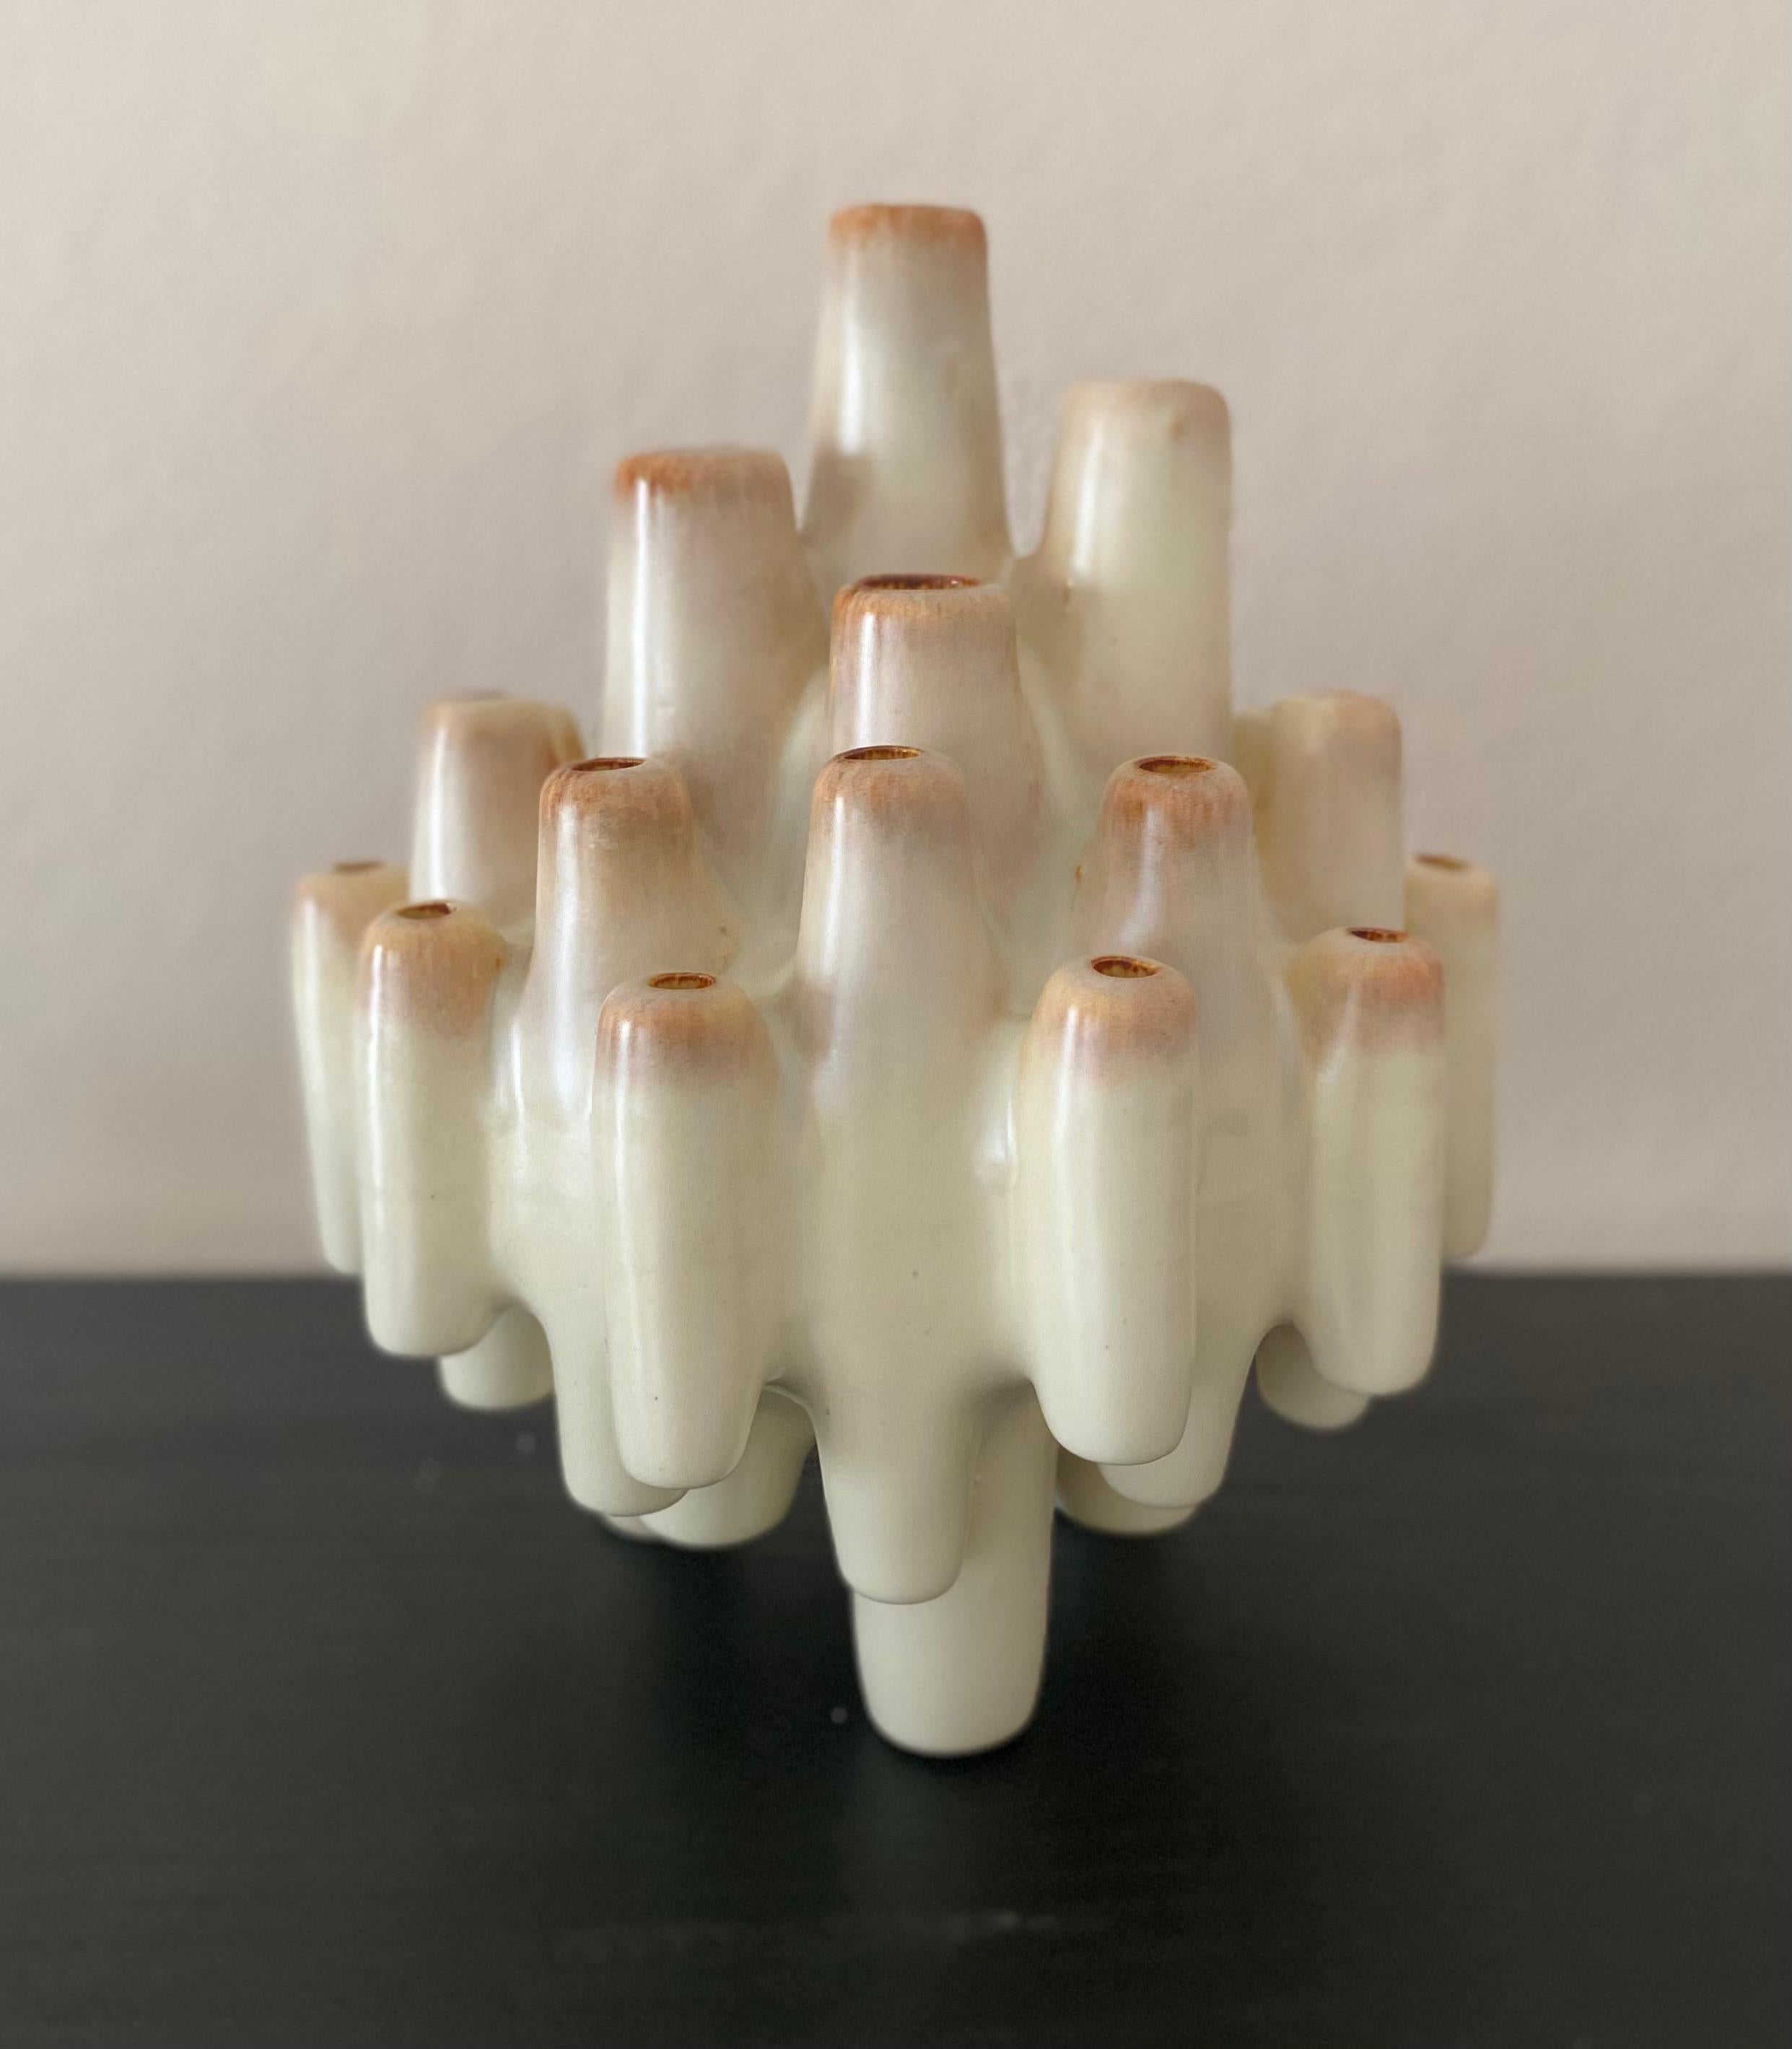 Step back in time to the artistic atmosphere of the 1960s with this remarkable sculptural pique fleurs vase, handcrafted by Bertoncello Ceramiche D’Arte in Italy. This vase, adorned with brown, white, beige, and chimney hues, is a striking and